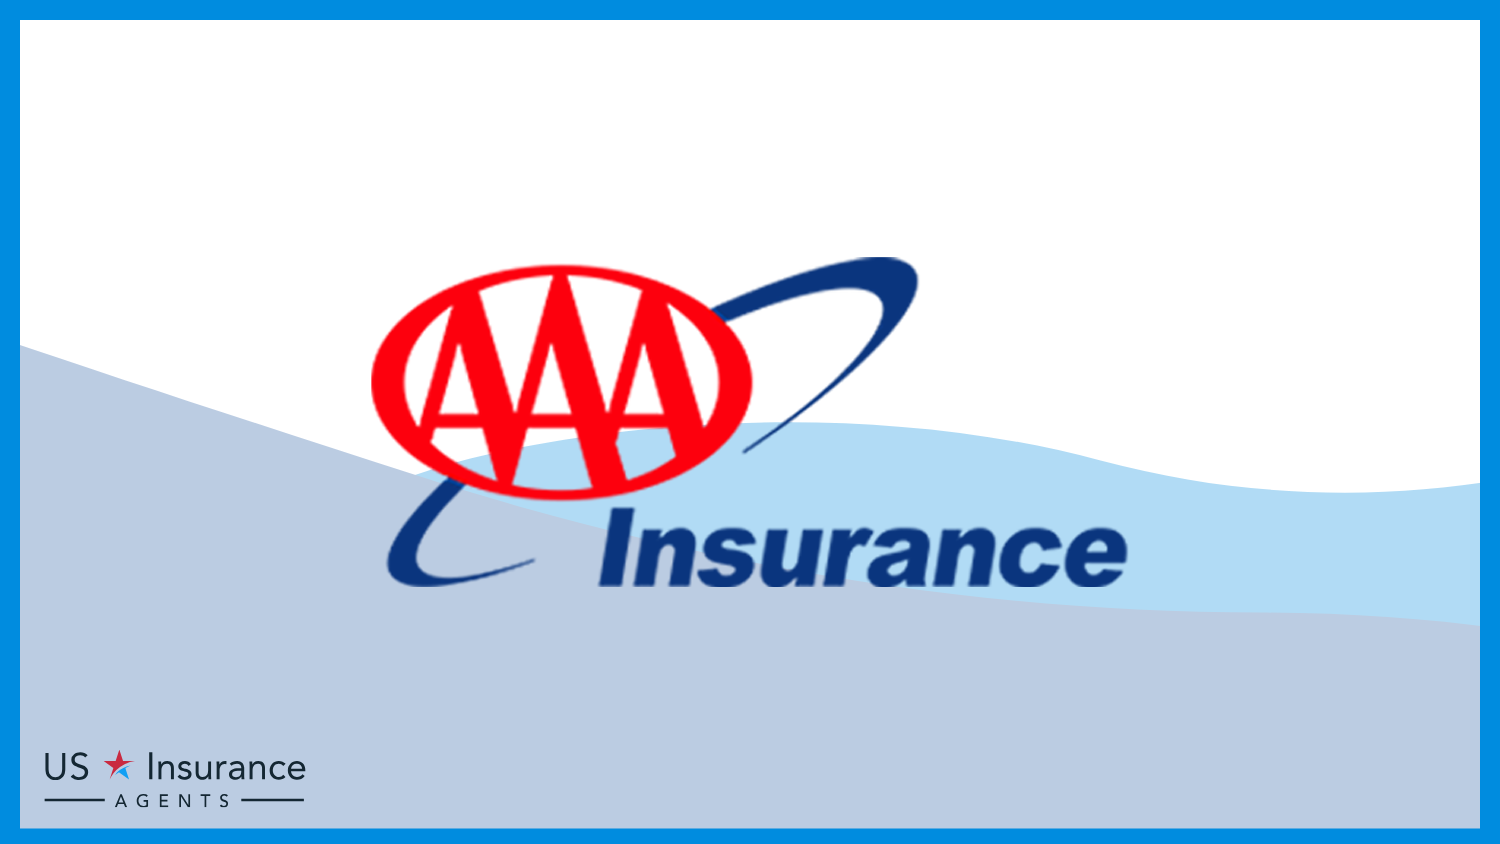 AAA: Best Business Insurance for Hotels